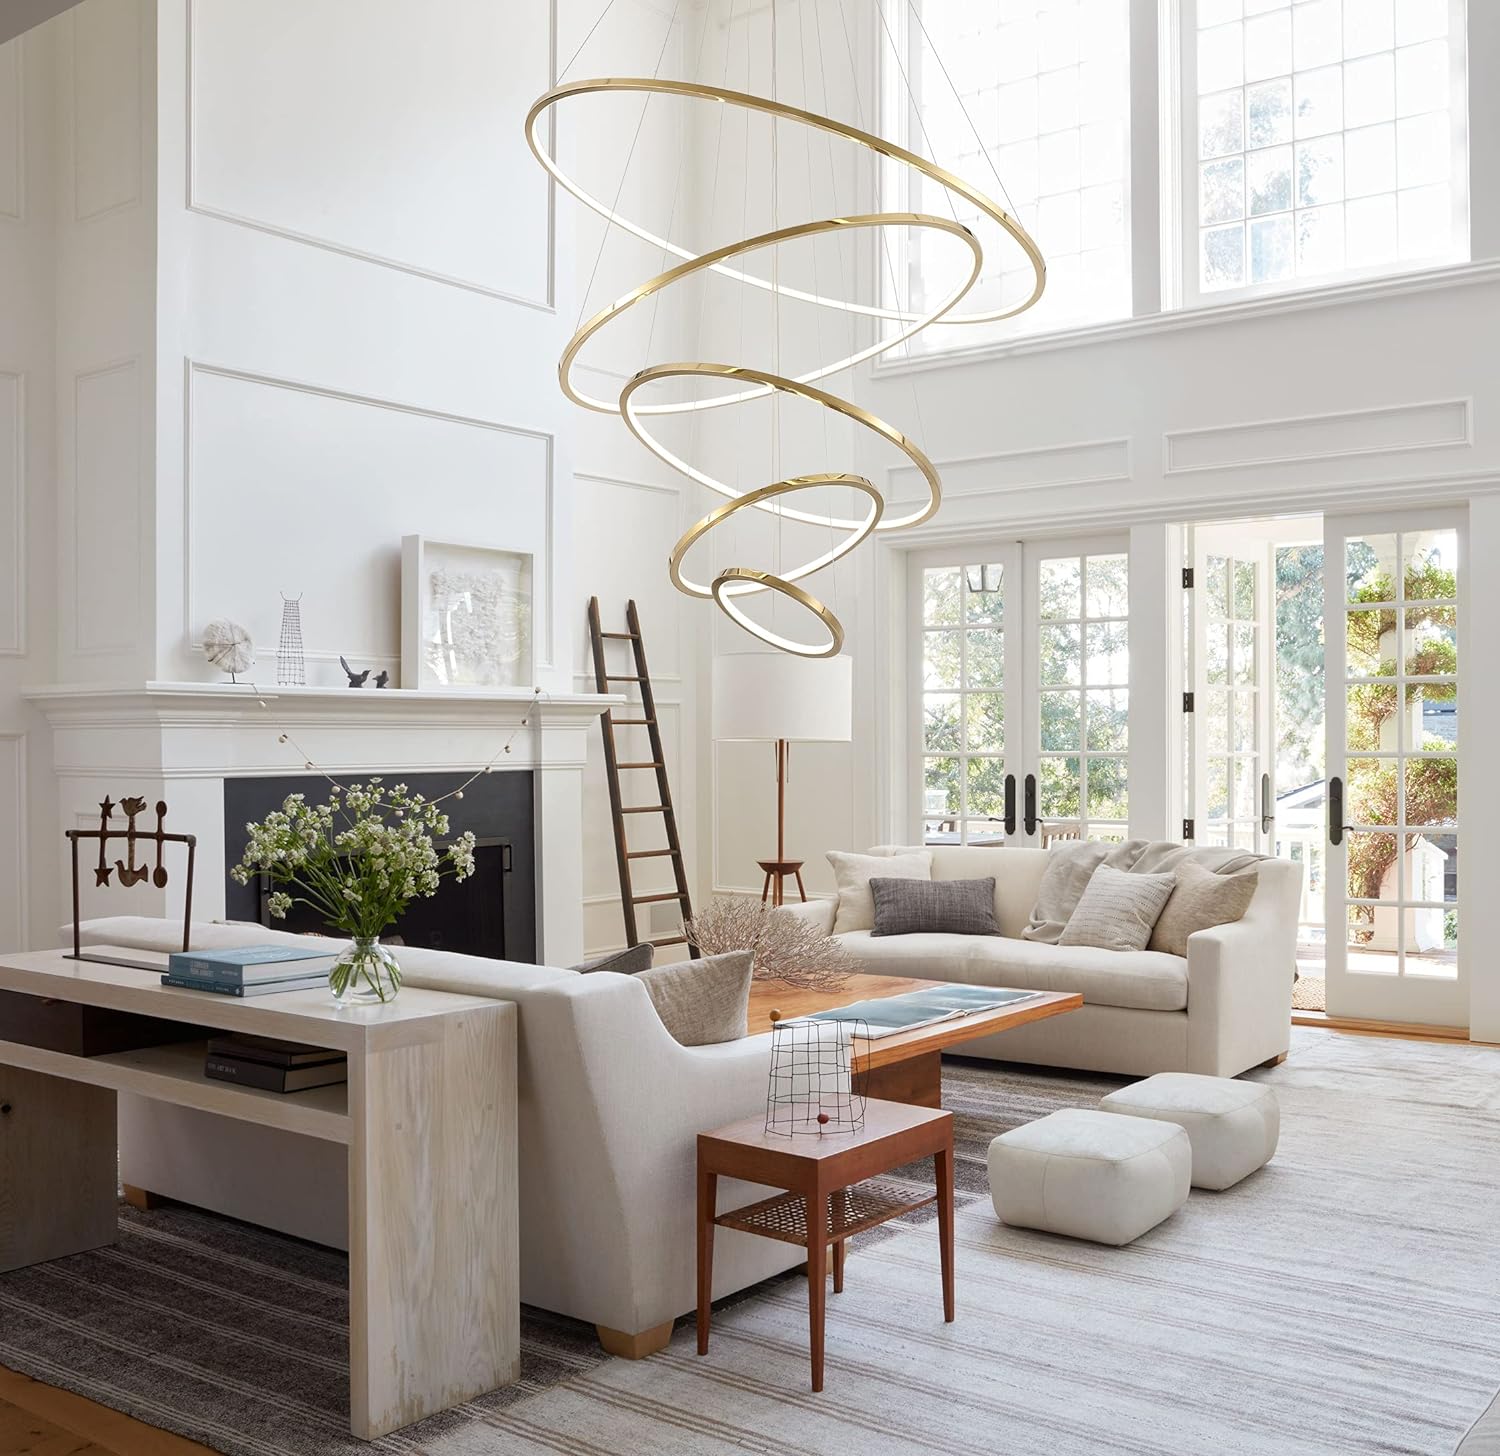 Akeelighting Modern 5 Ring High Ceiling Chandeliers for Foyer Dimmable Light Fixture - $500